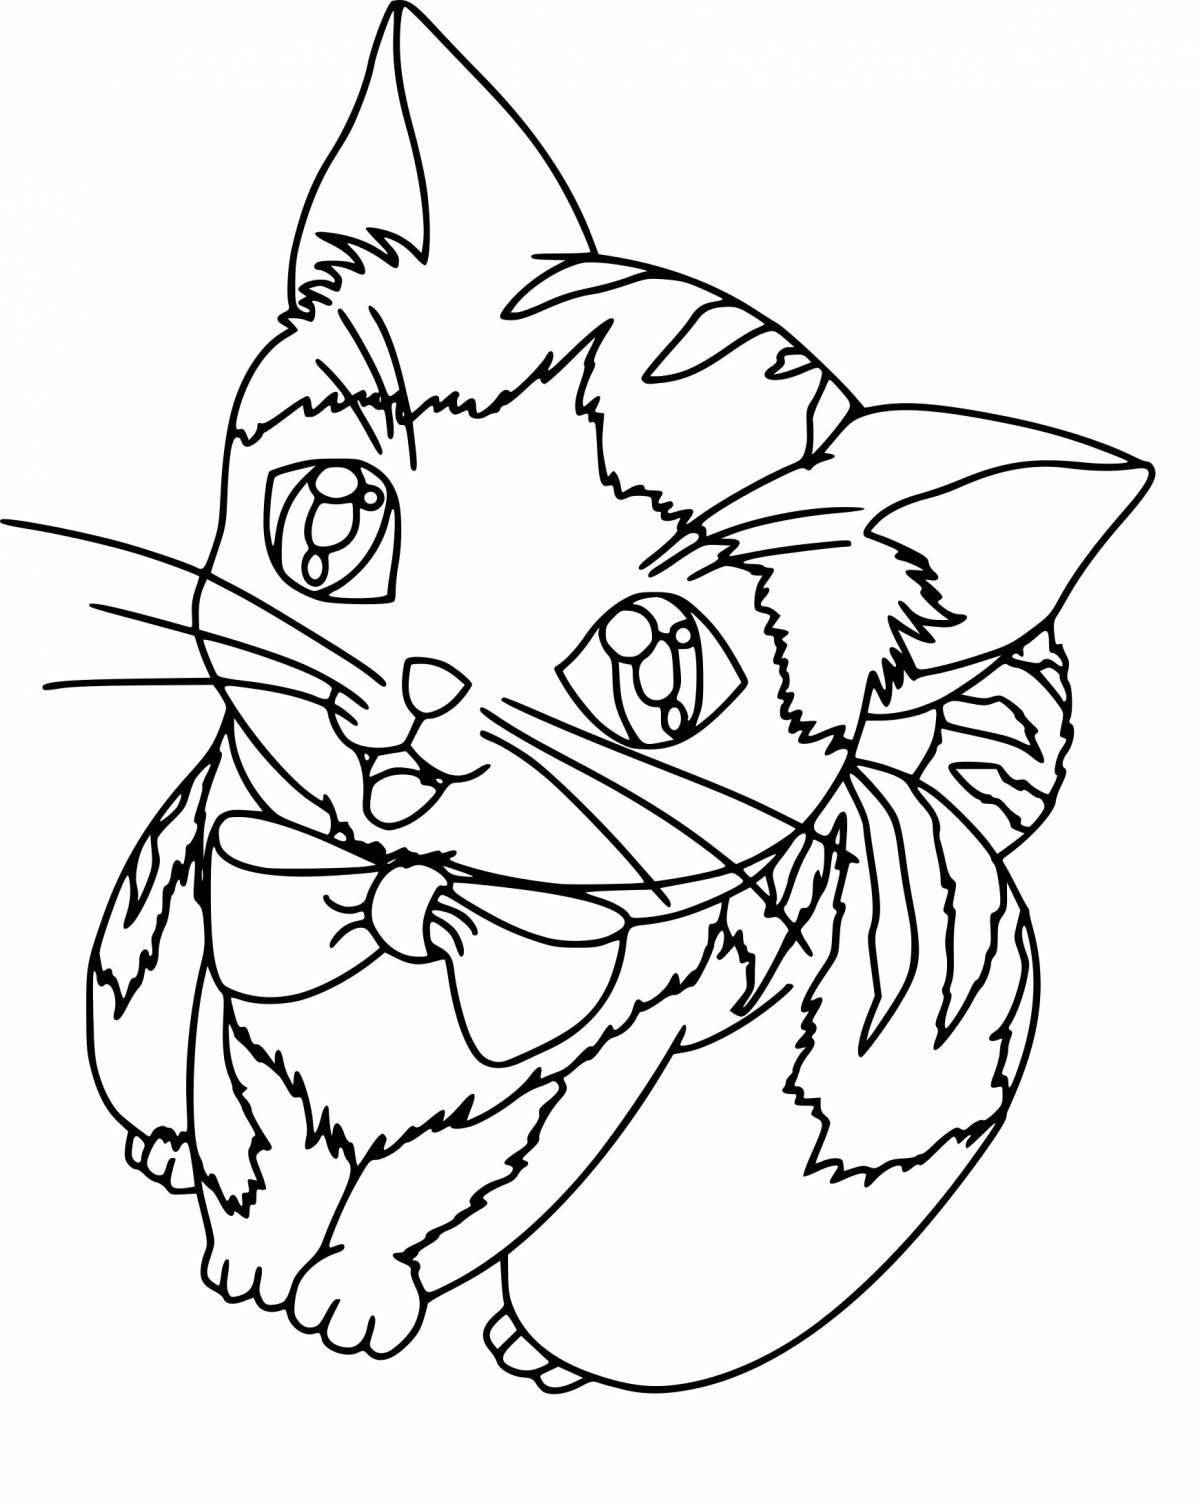 Fabulous year of the cat coloring page